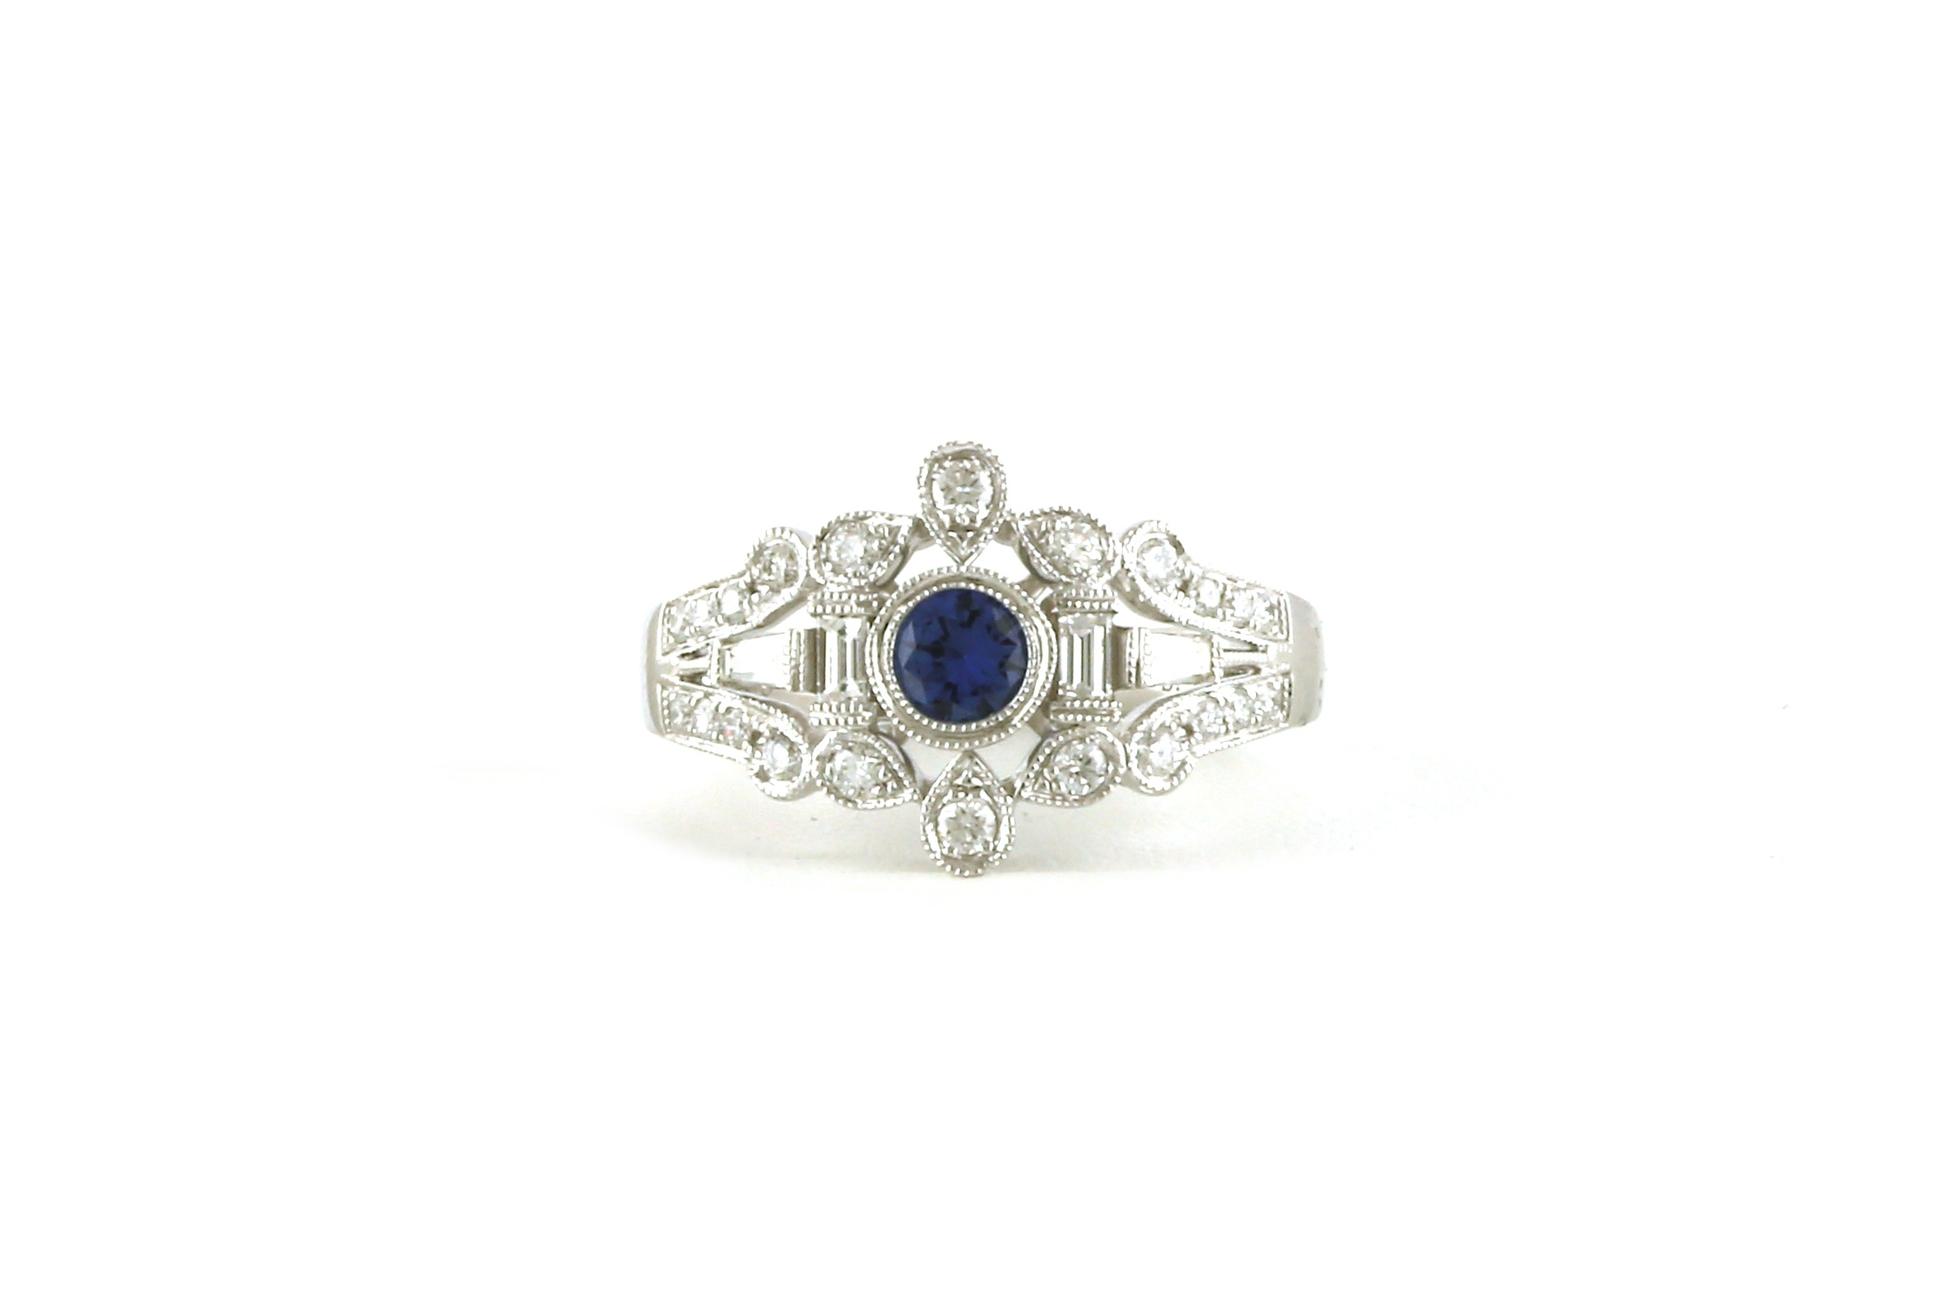 Antique Style Halo 3-Row Bezel Montana Yogo Sapphire and Diamond Ring in White Gold (0.72cts TWT)